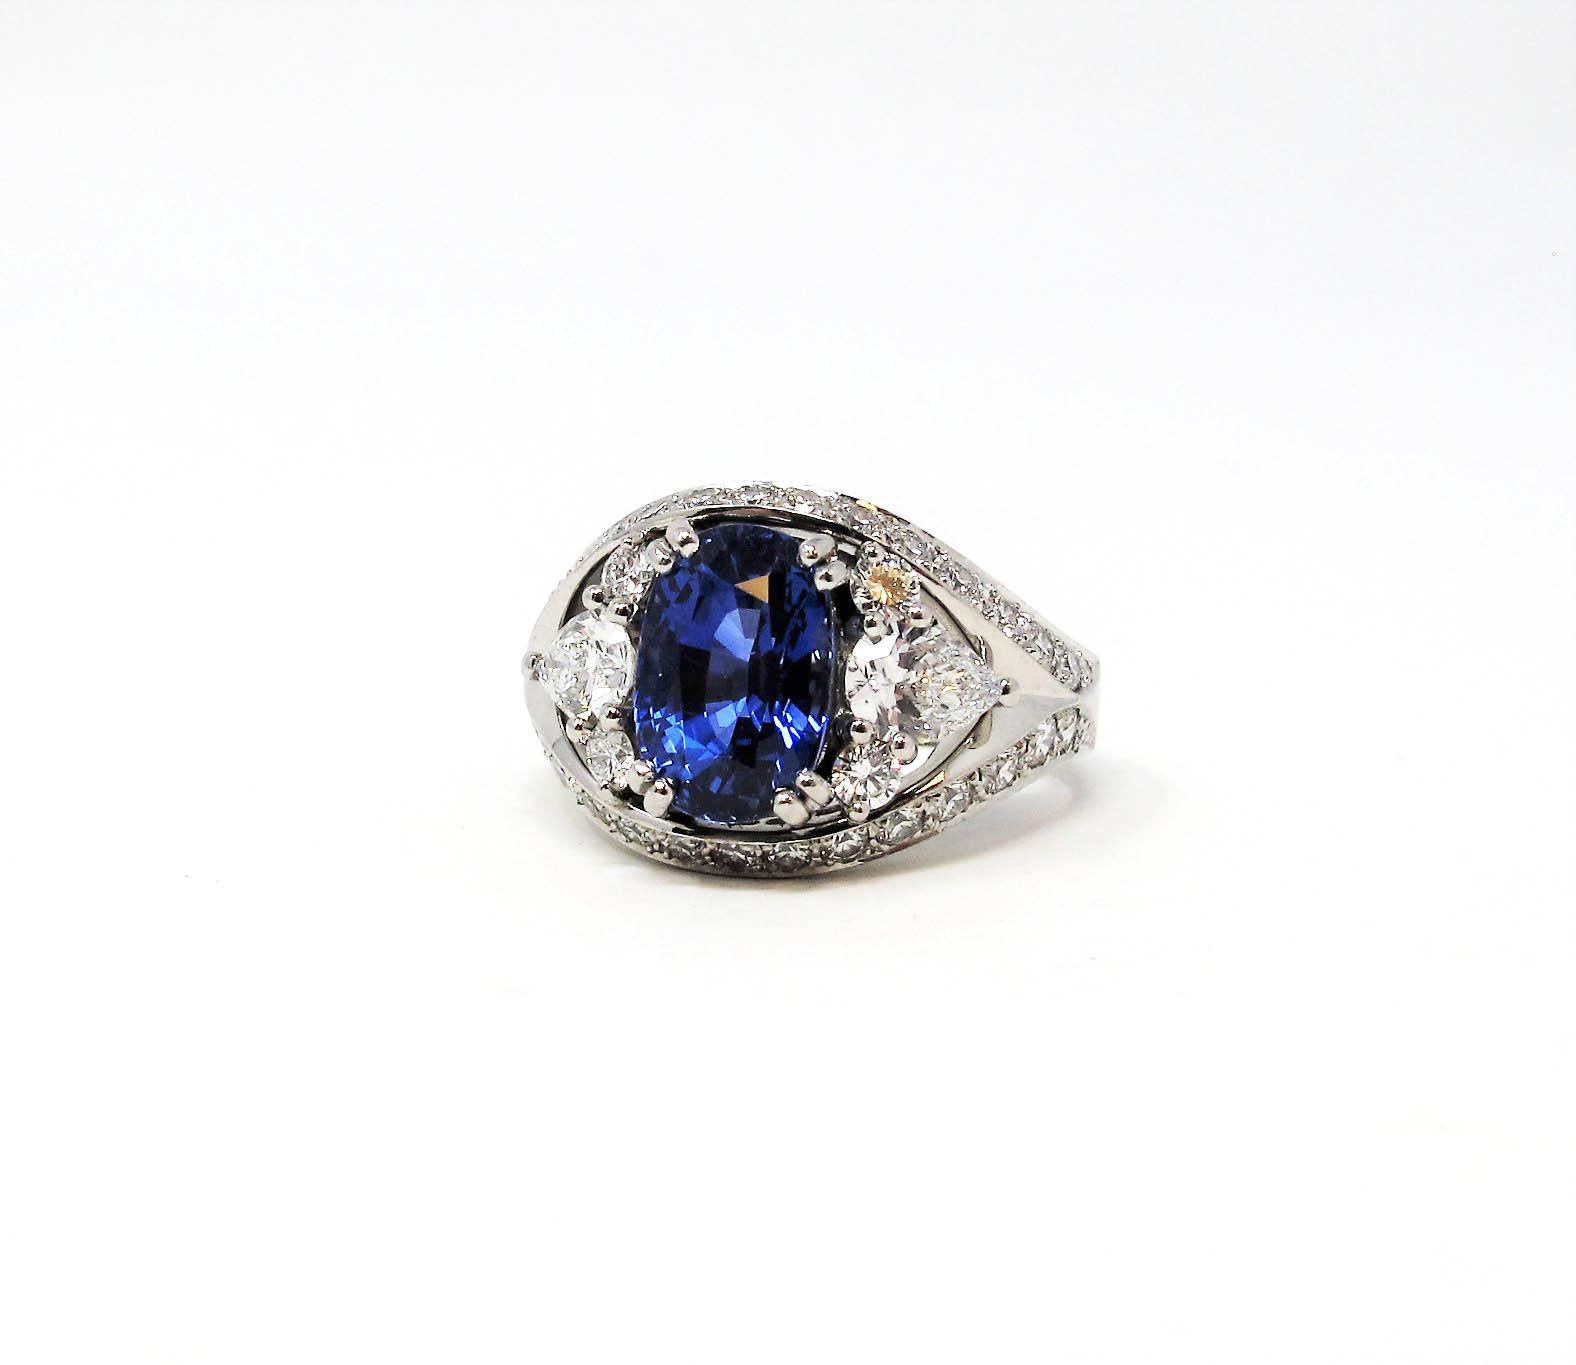 3.10 Carat Untreated Oval Mixed Cut Sapphire and Diamond Ring in Platinum In Good Condition For Sale In Scottsdale, AZ